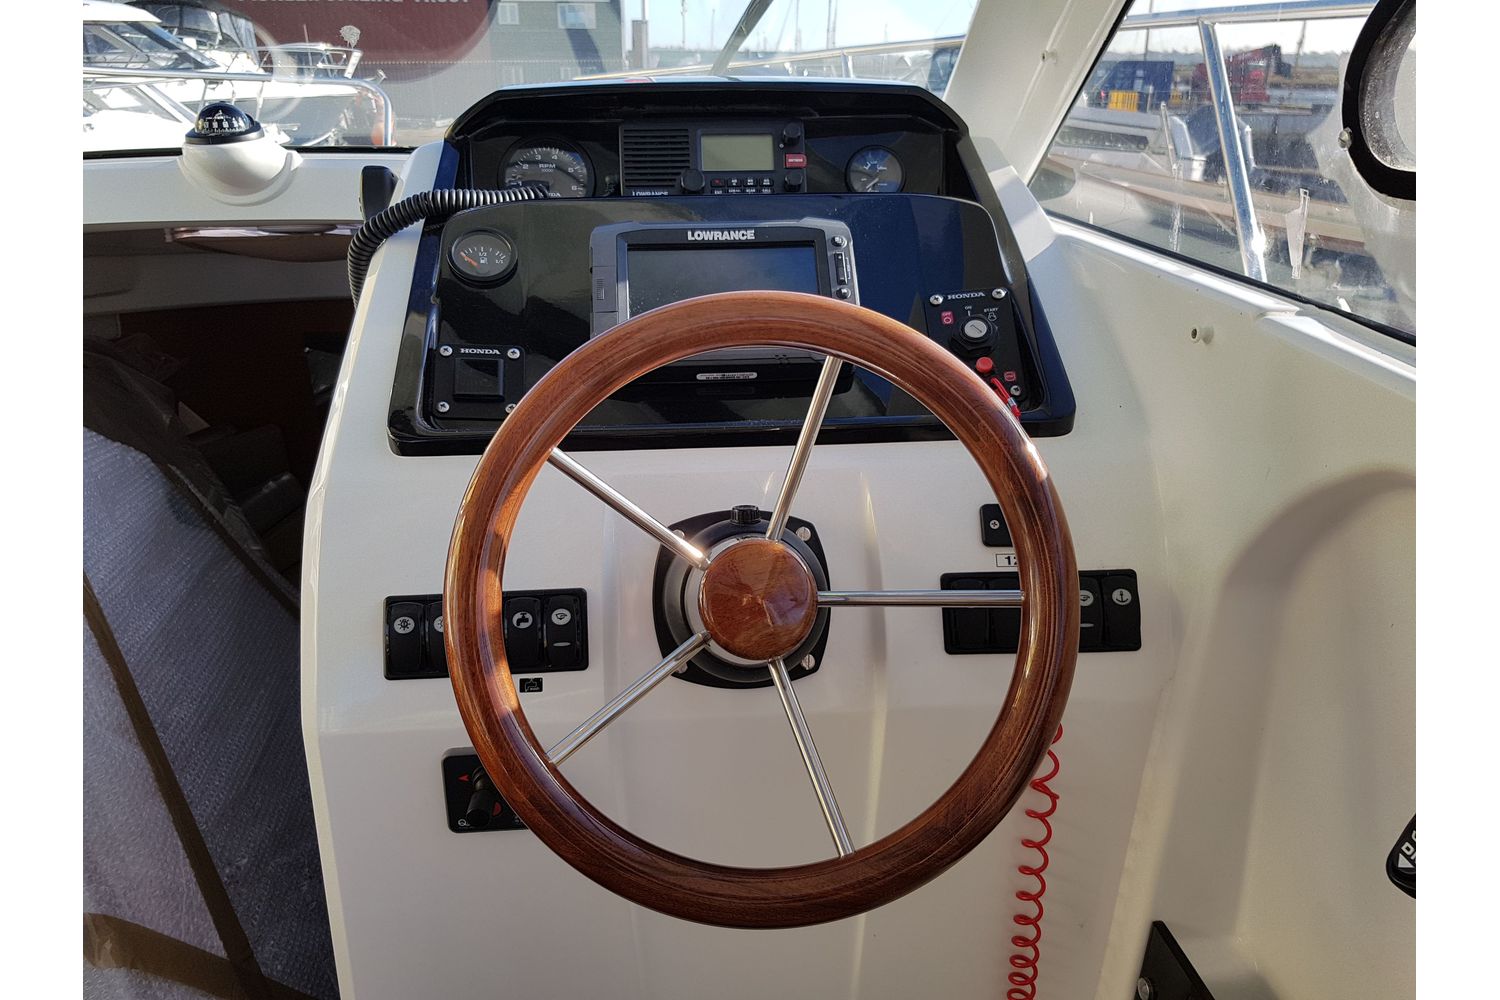 Jeanneau Merry Fisher 755 - engine controls and dash